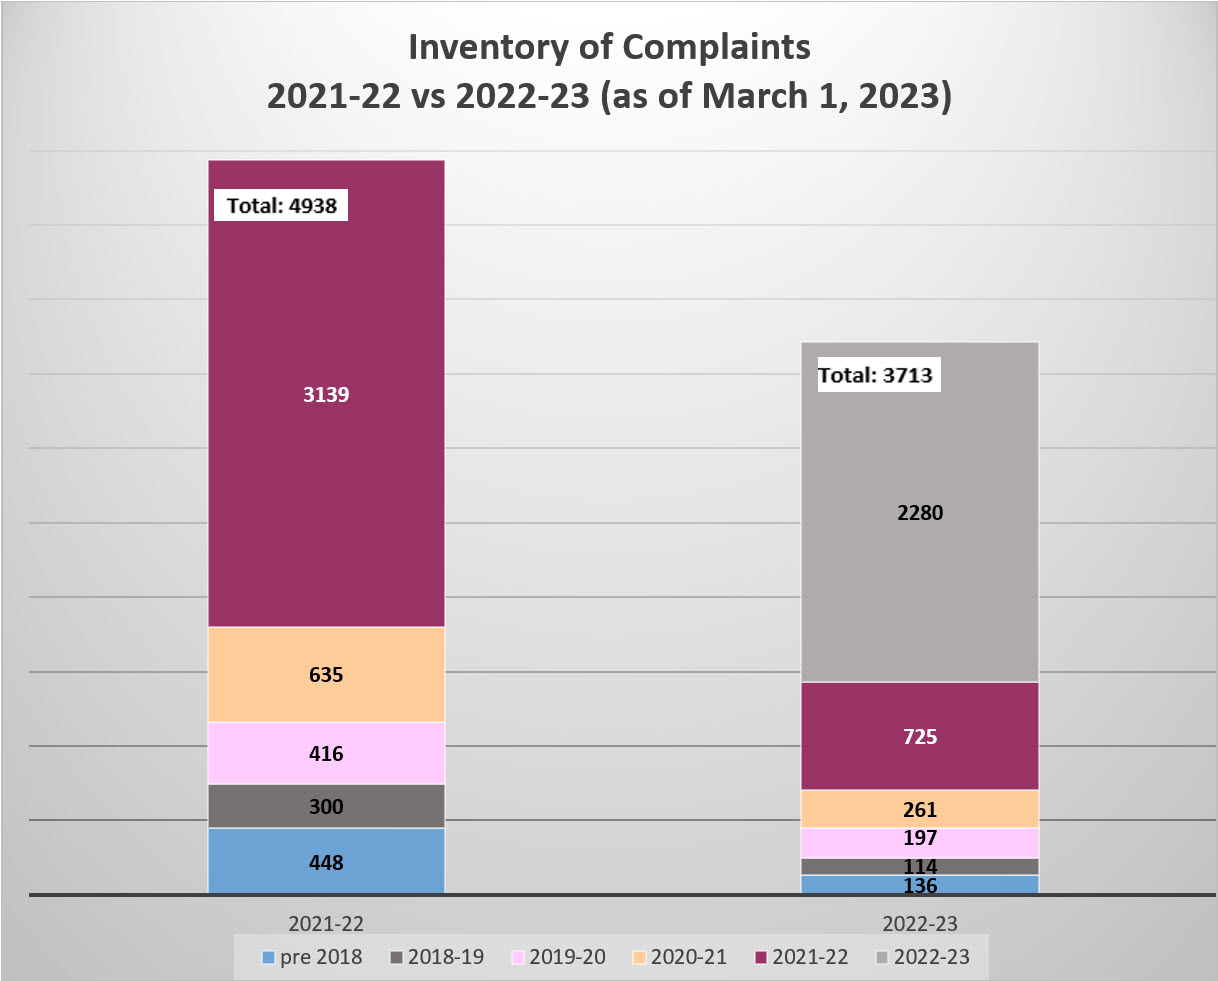 Inventory of Complaints 2021-22 vs 2022-23 as of March 1 2023